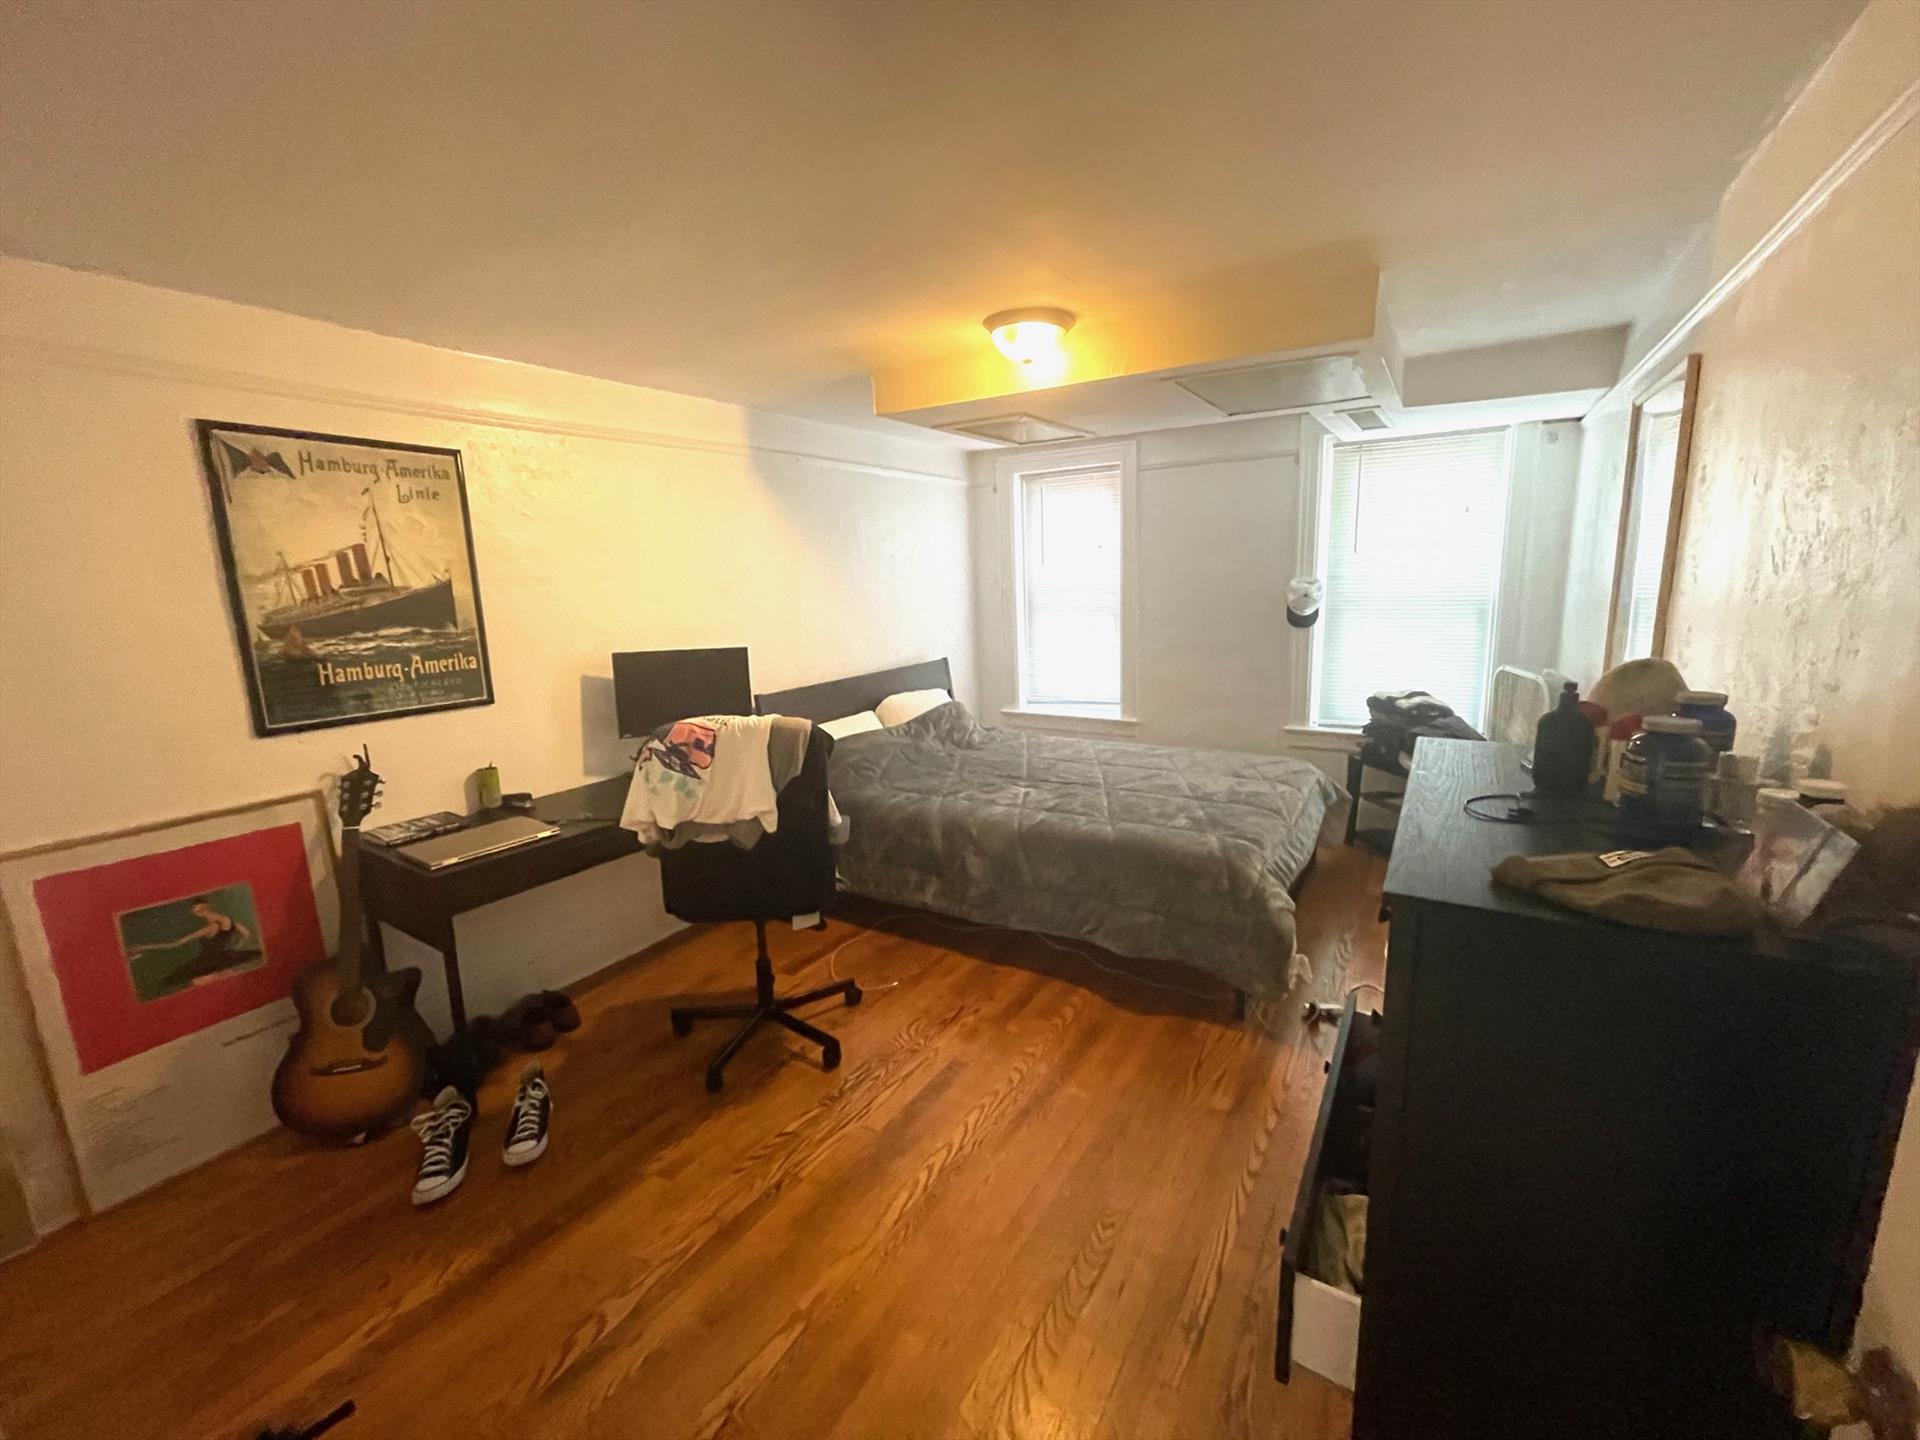 Location! Location! This 2 bedroom garden level unit features good size bedrooms, tiled kitchen, & hardwood floors in the living room. You cannot beat this location! Available 10/1. One month broker fee. 